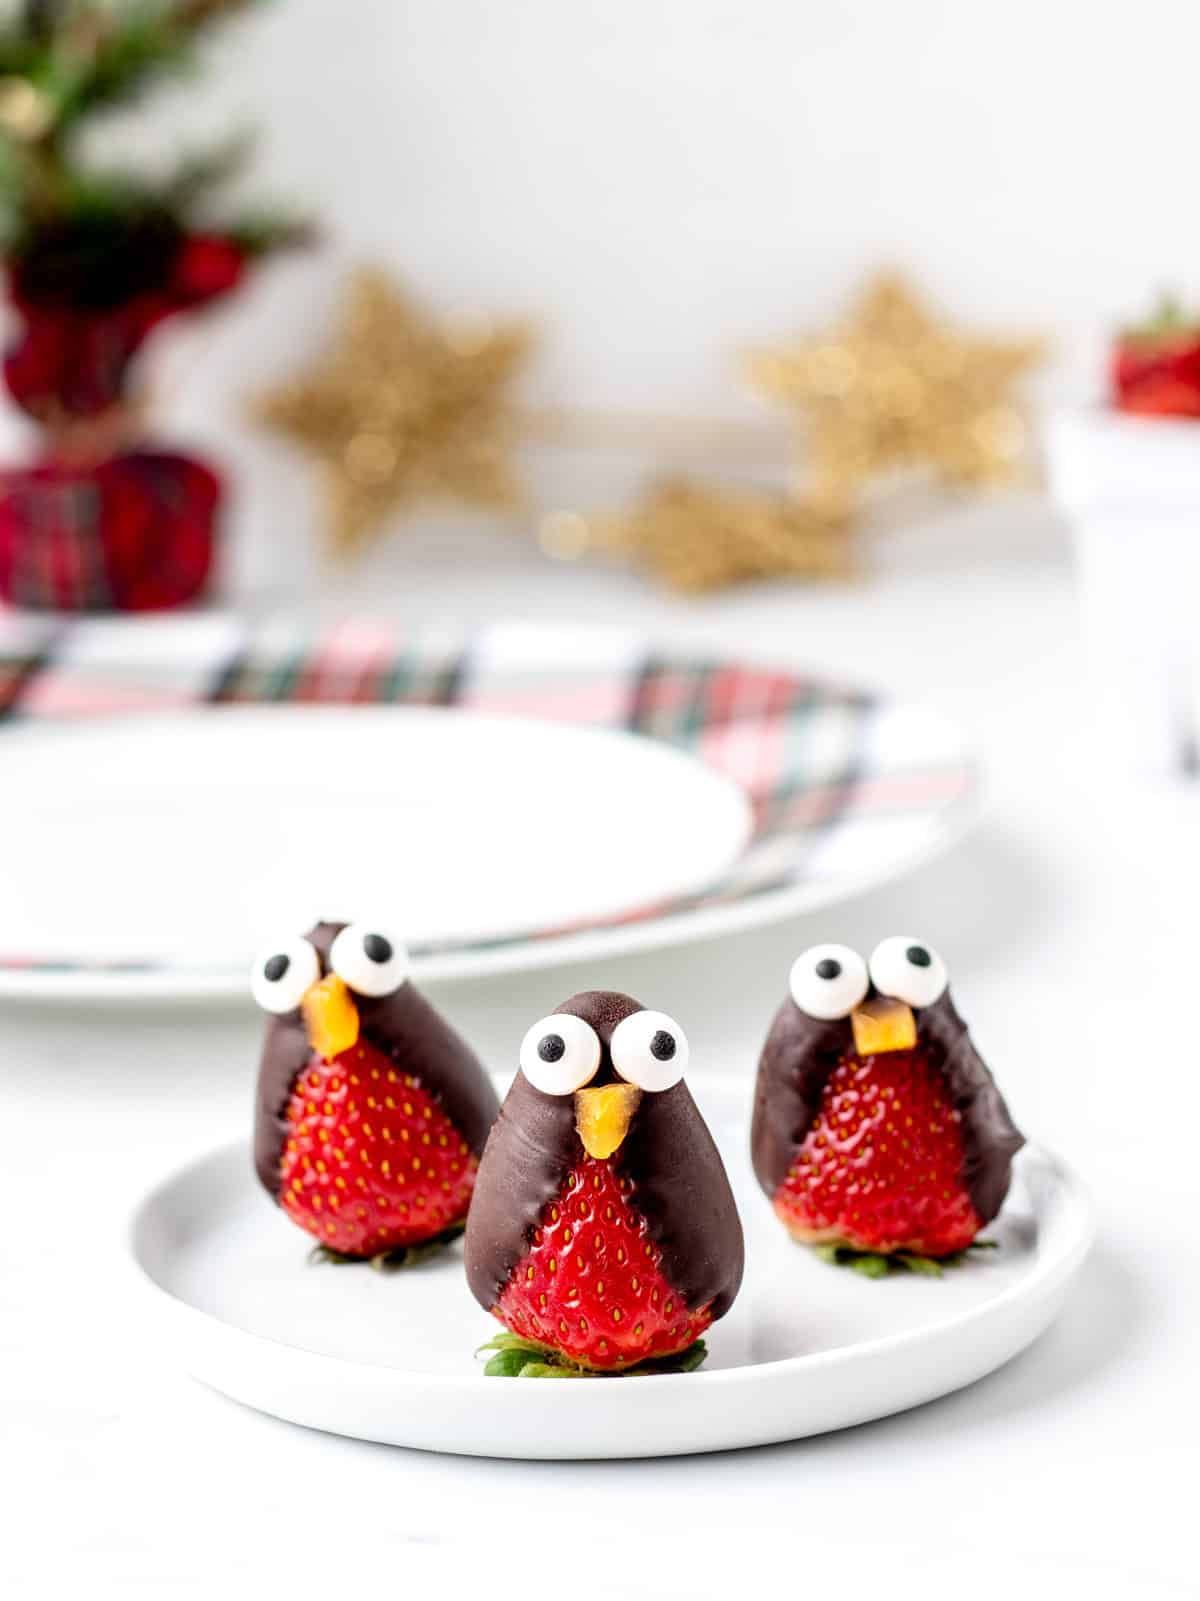 Three strawberry penguins on a white plate.